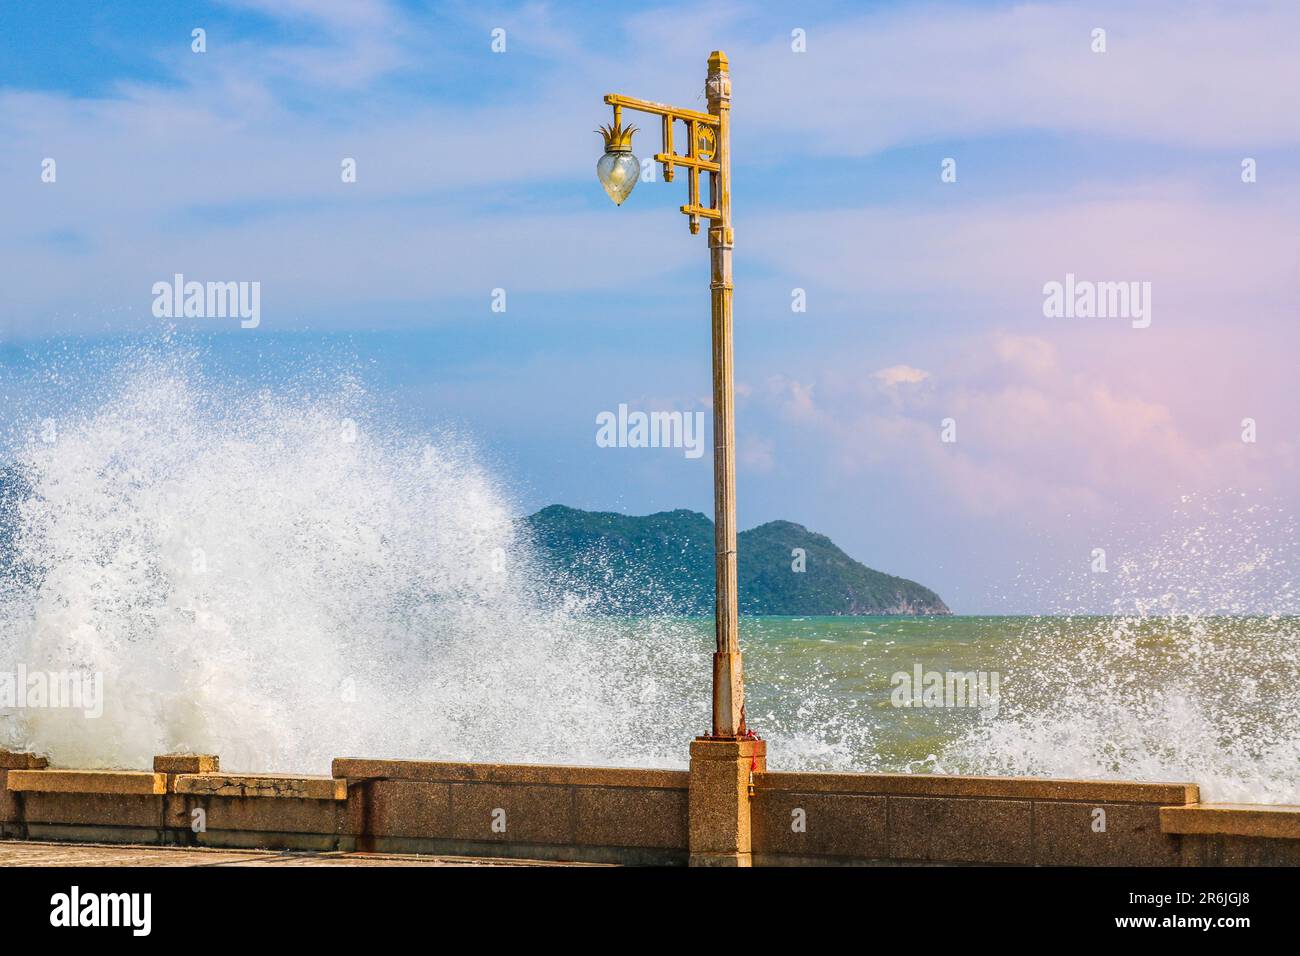 Strong surf, high waves with splashes, a raging sea, a lantern on the embankment. Stock Photo